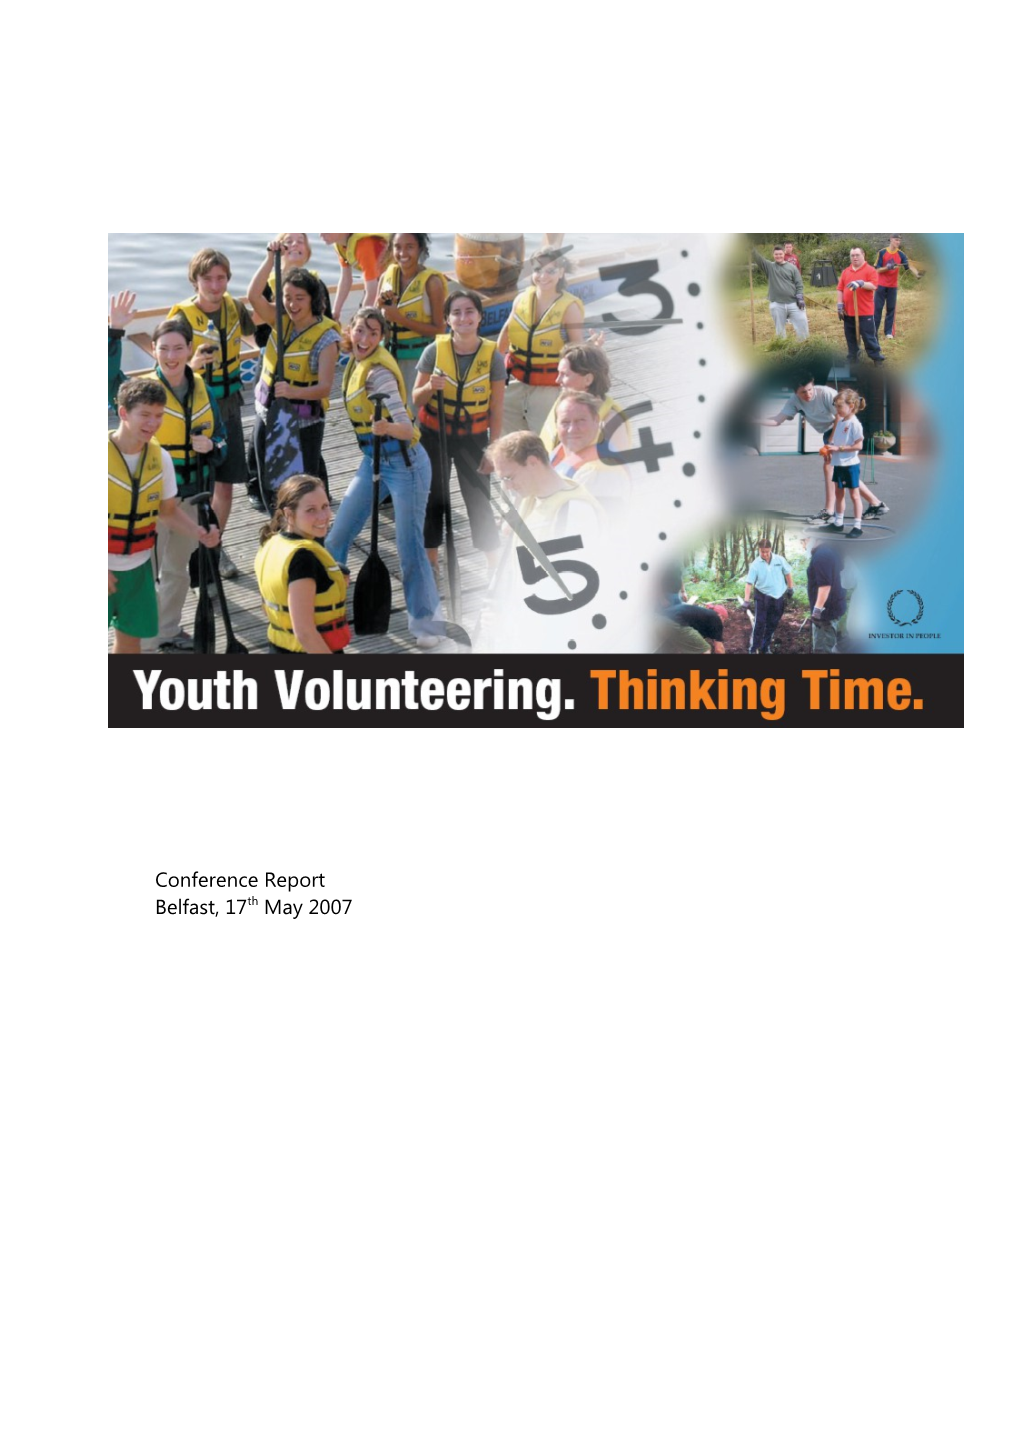 Youth Volunteering Thinking Time – Conference Report